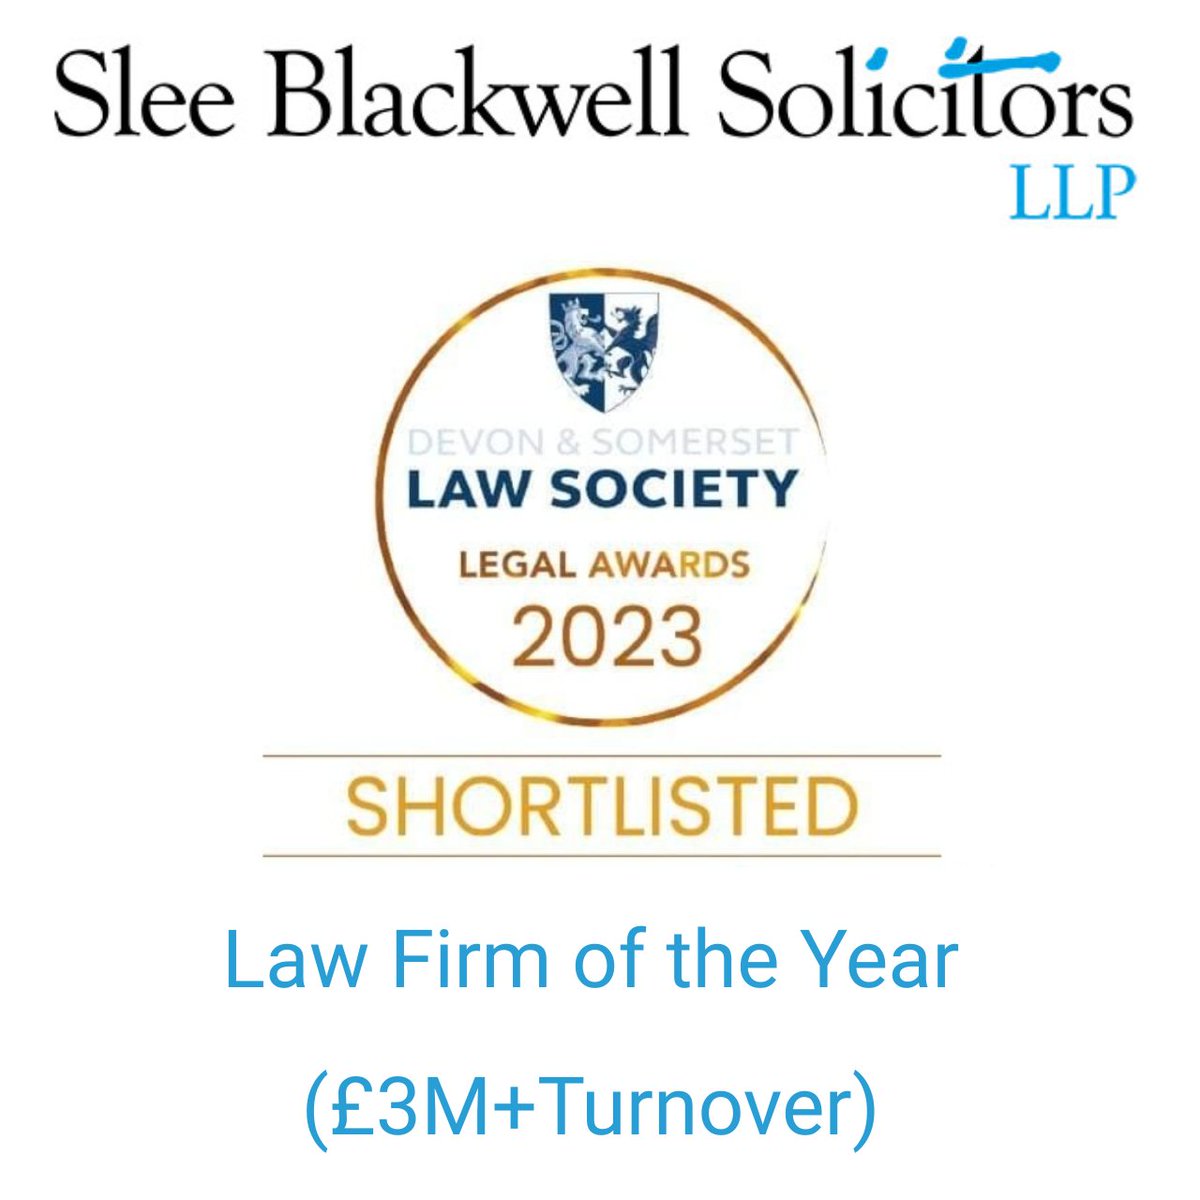 Just days away from #dasls 2023 & we're so looking forward to a wonderful evening celebrating the best of #Devon & #Somerset #legal talent with @DSLawSociety and @TheShaunWallace